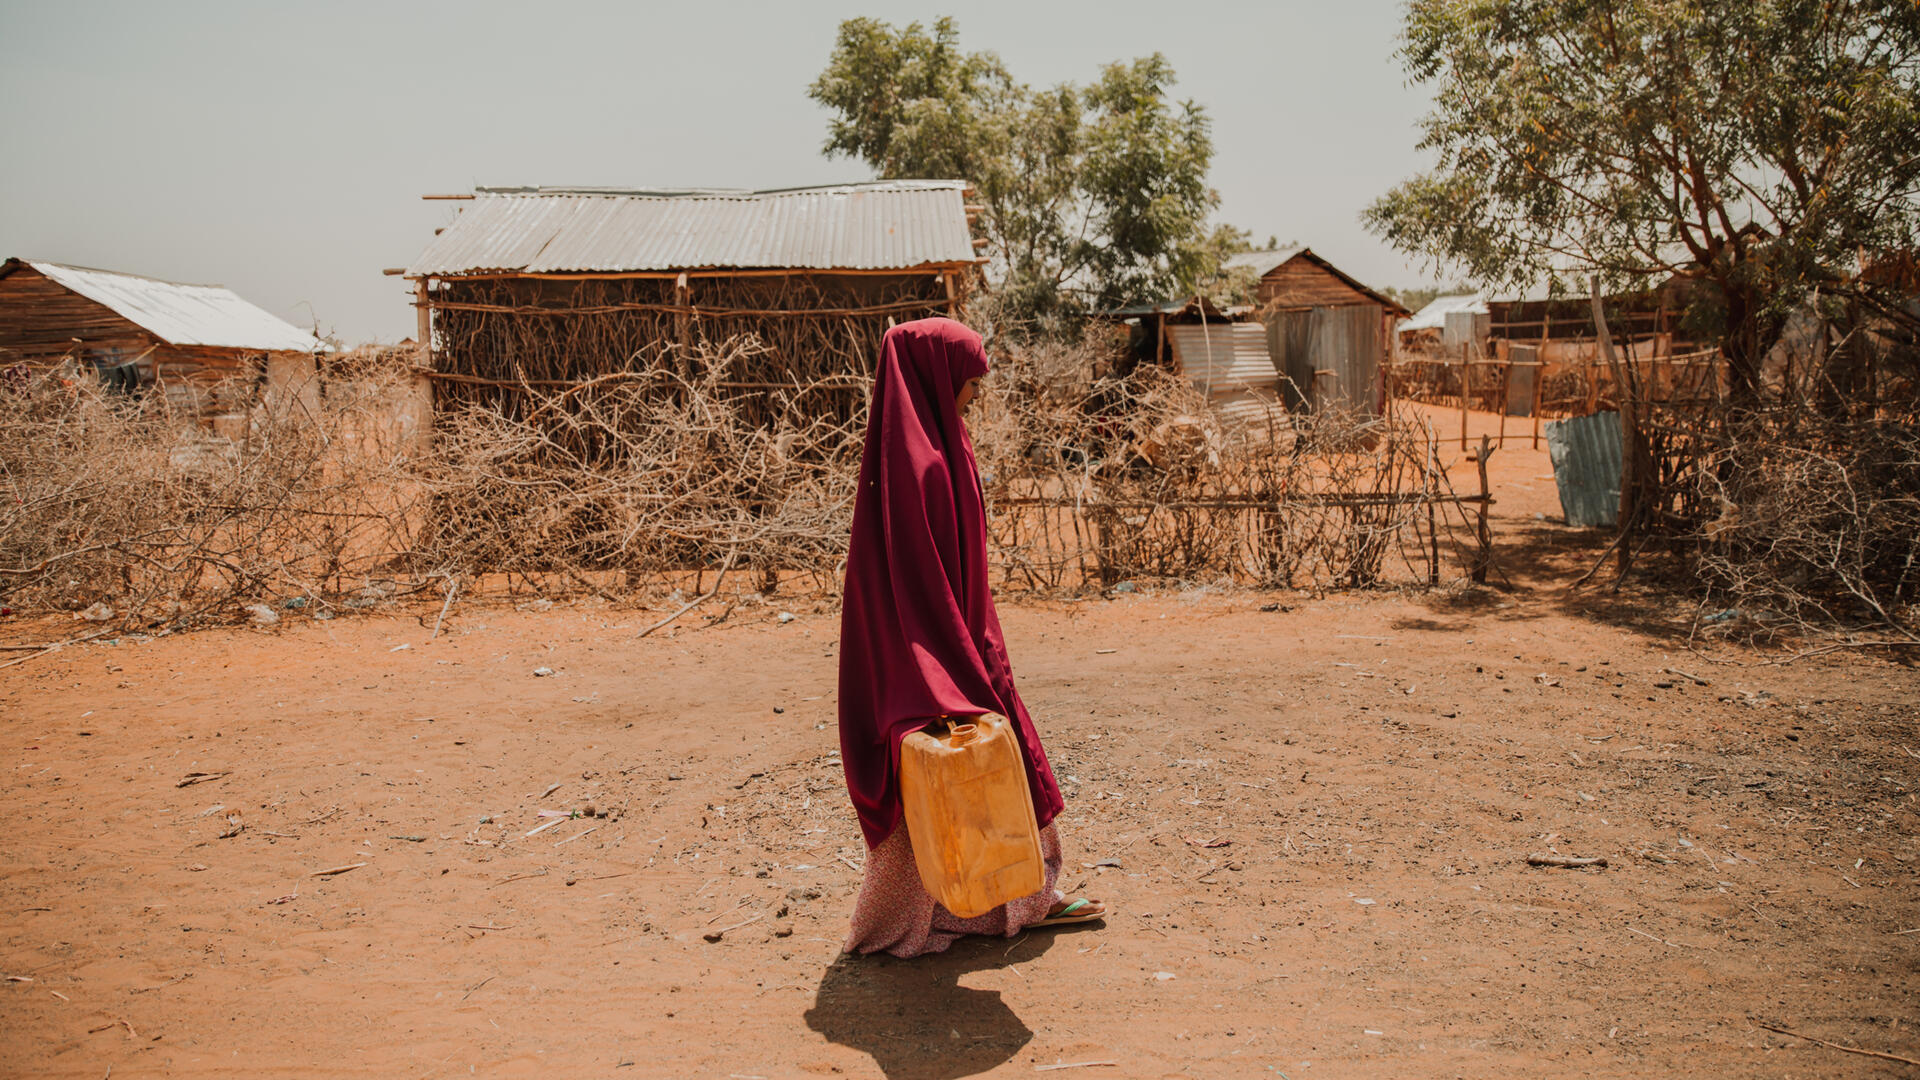 In Ethiopia, a girl walks along a dusty village lane carrying a jerry can to collect water for her family.